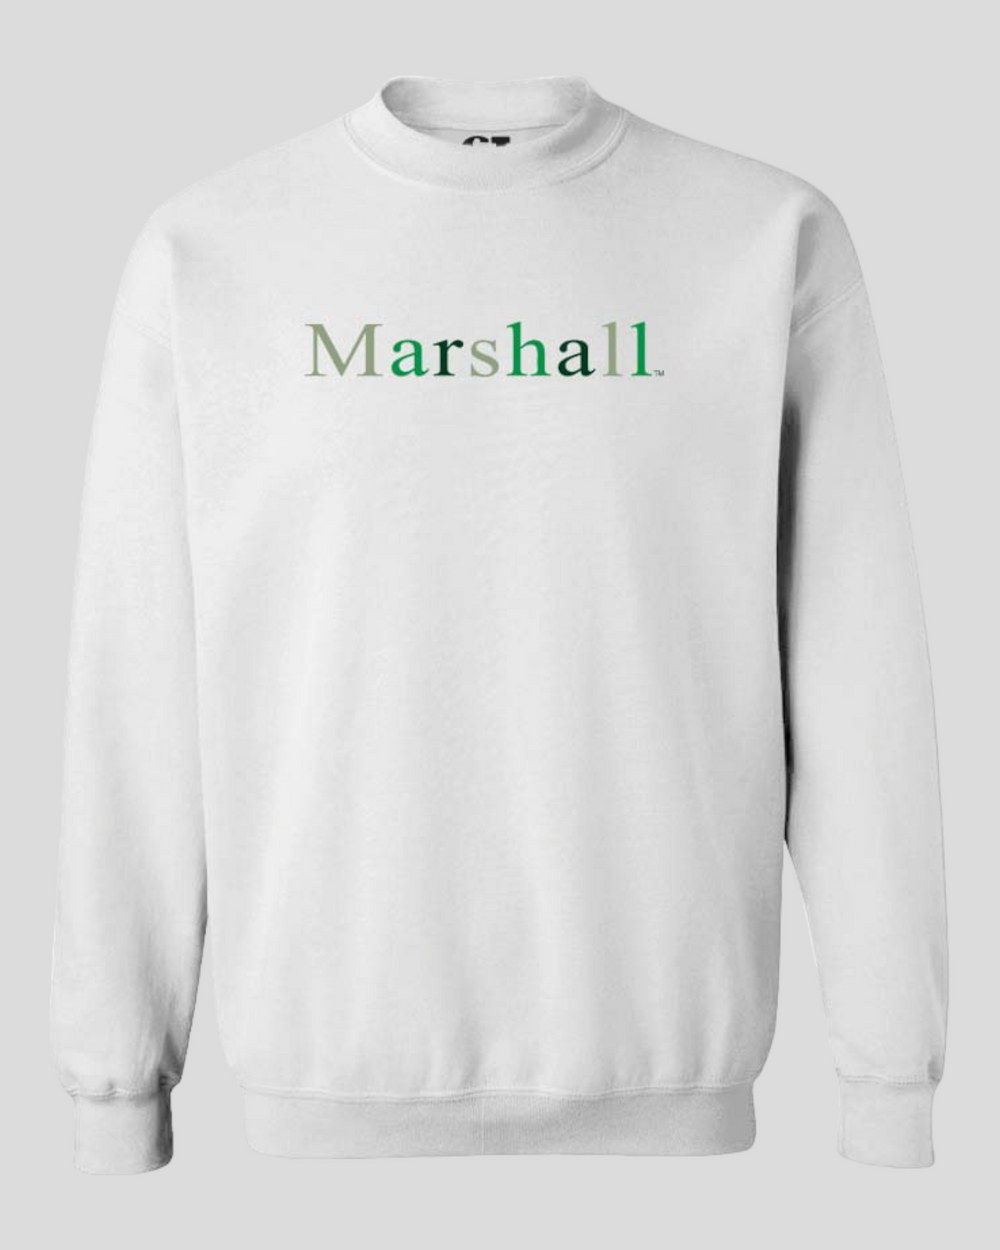 the Team green sweatshirt in a flat lay pose with marshall spelled in varying shades of green